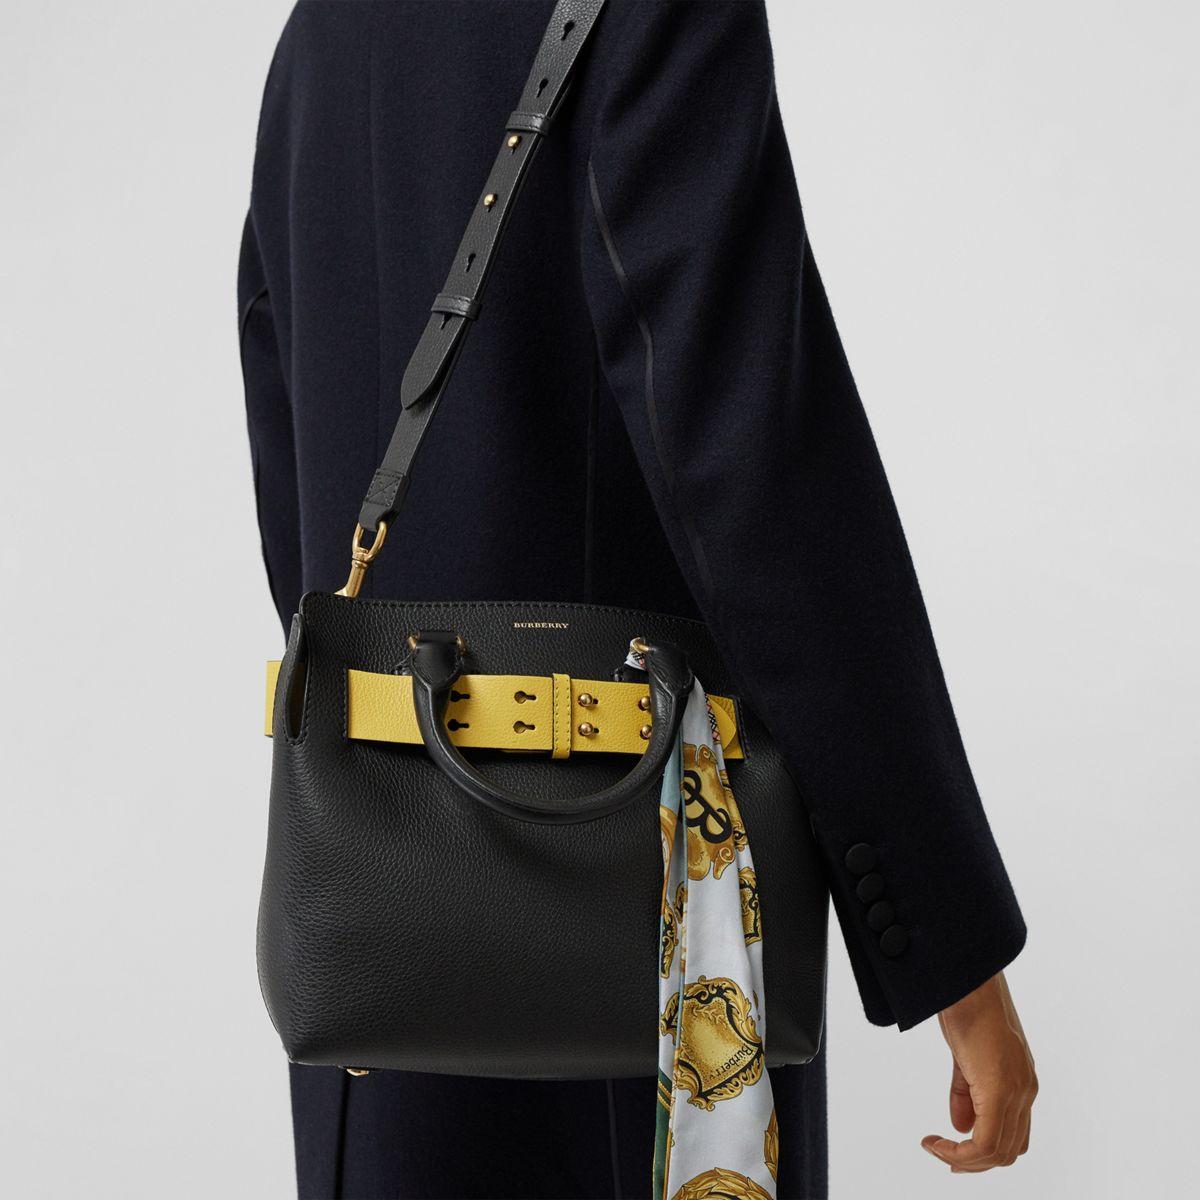 Burberry The Small Leather Belt Bag in Black/Yellow (Black)